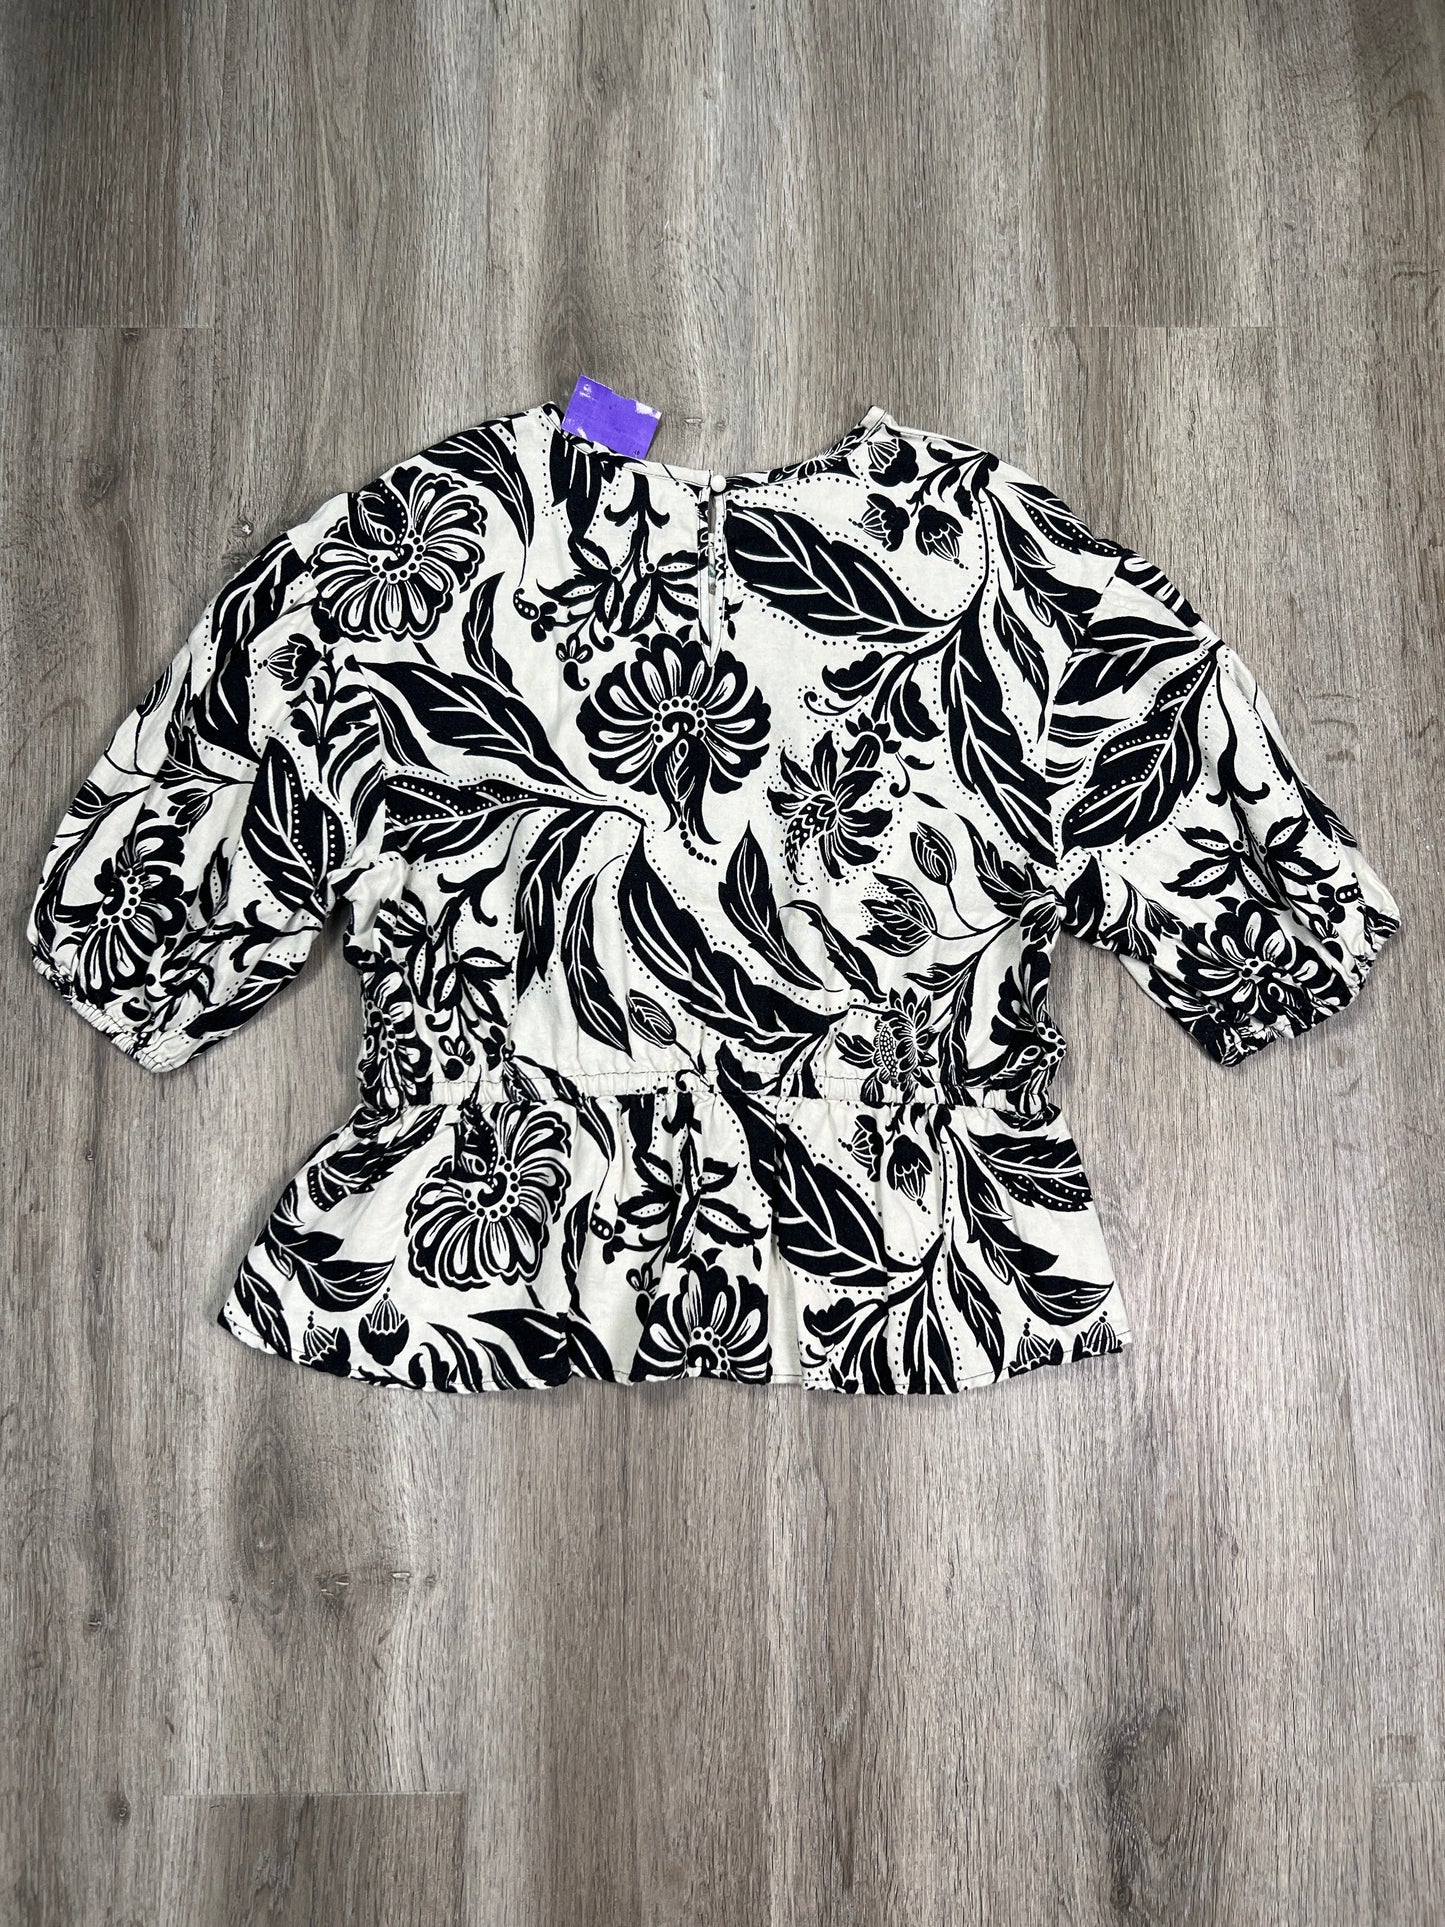 Black & White Blouse Short Sleeve Who What Wear, Size Xl